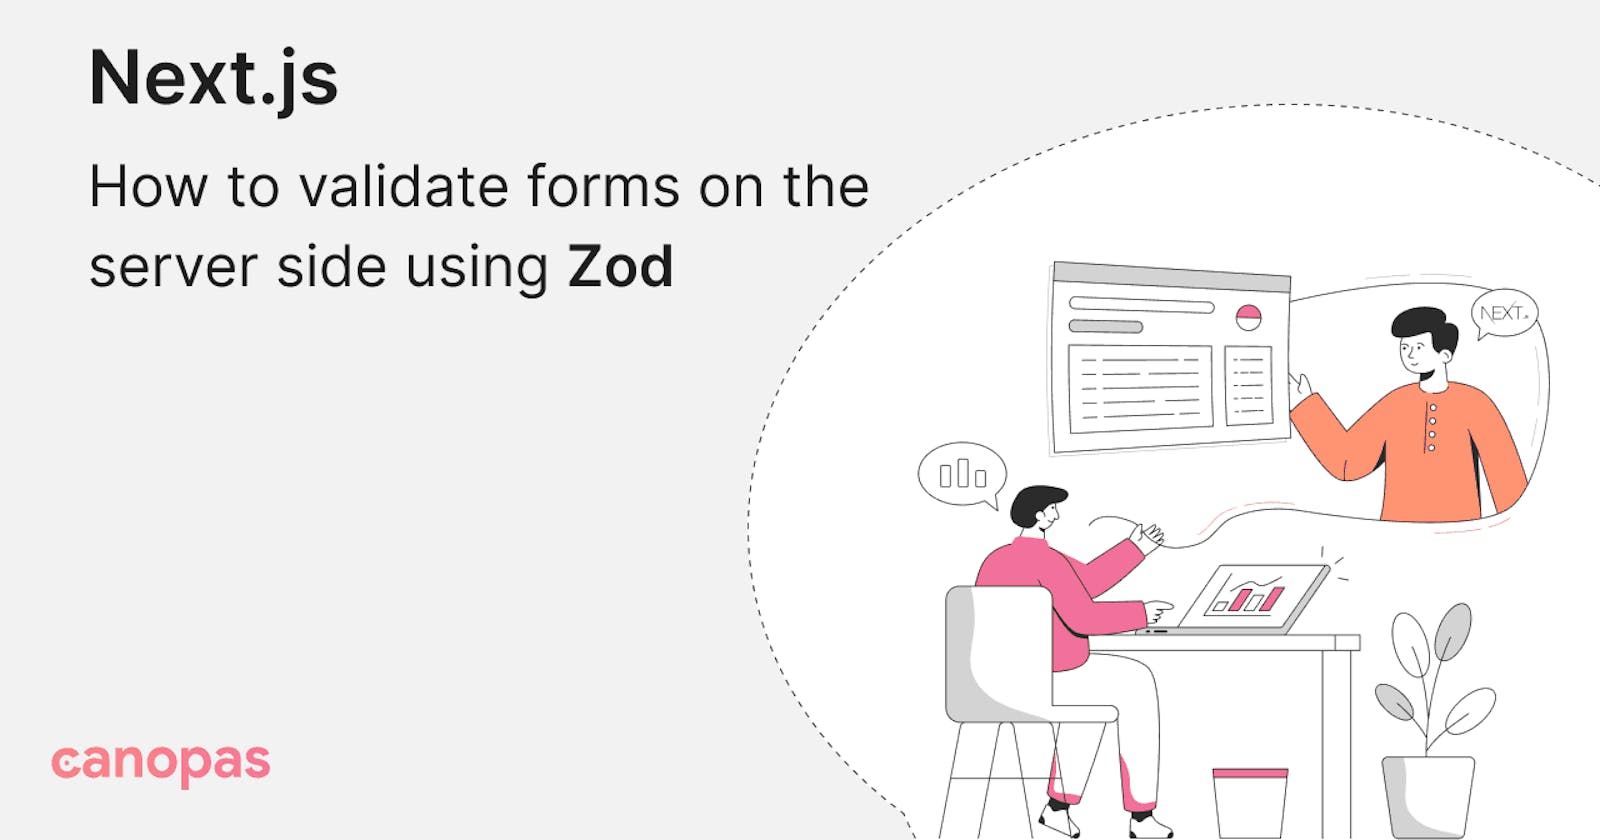 Next.js: How to validate forms on the server side using Zod